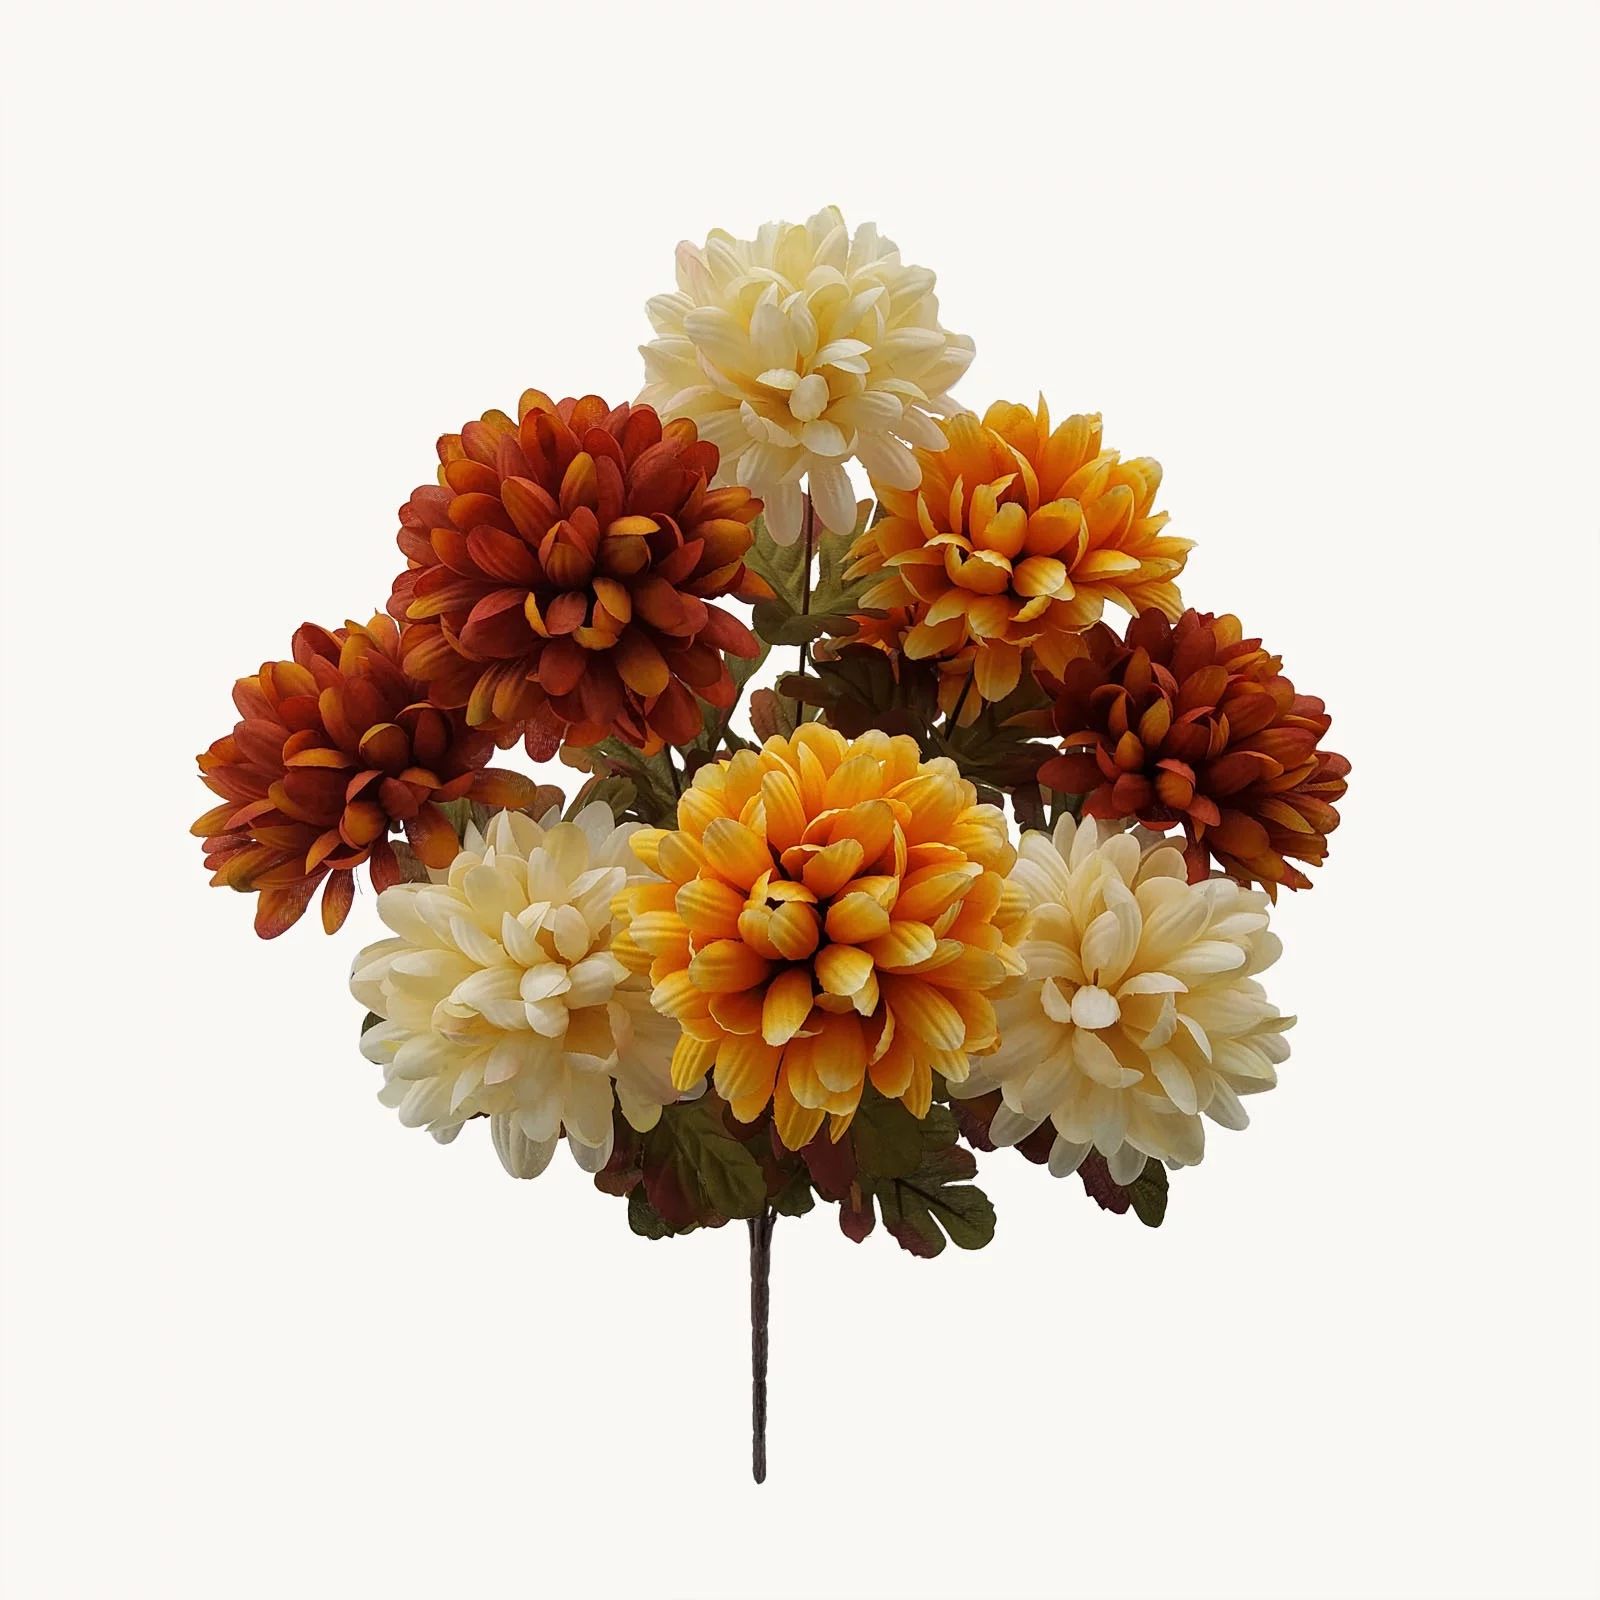 Mainstays Indoor Artificial Flower Bush, Mums, Cream and Orange Colors. Assembled Product Height ... | Walmart (US)